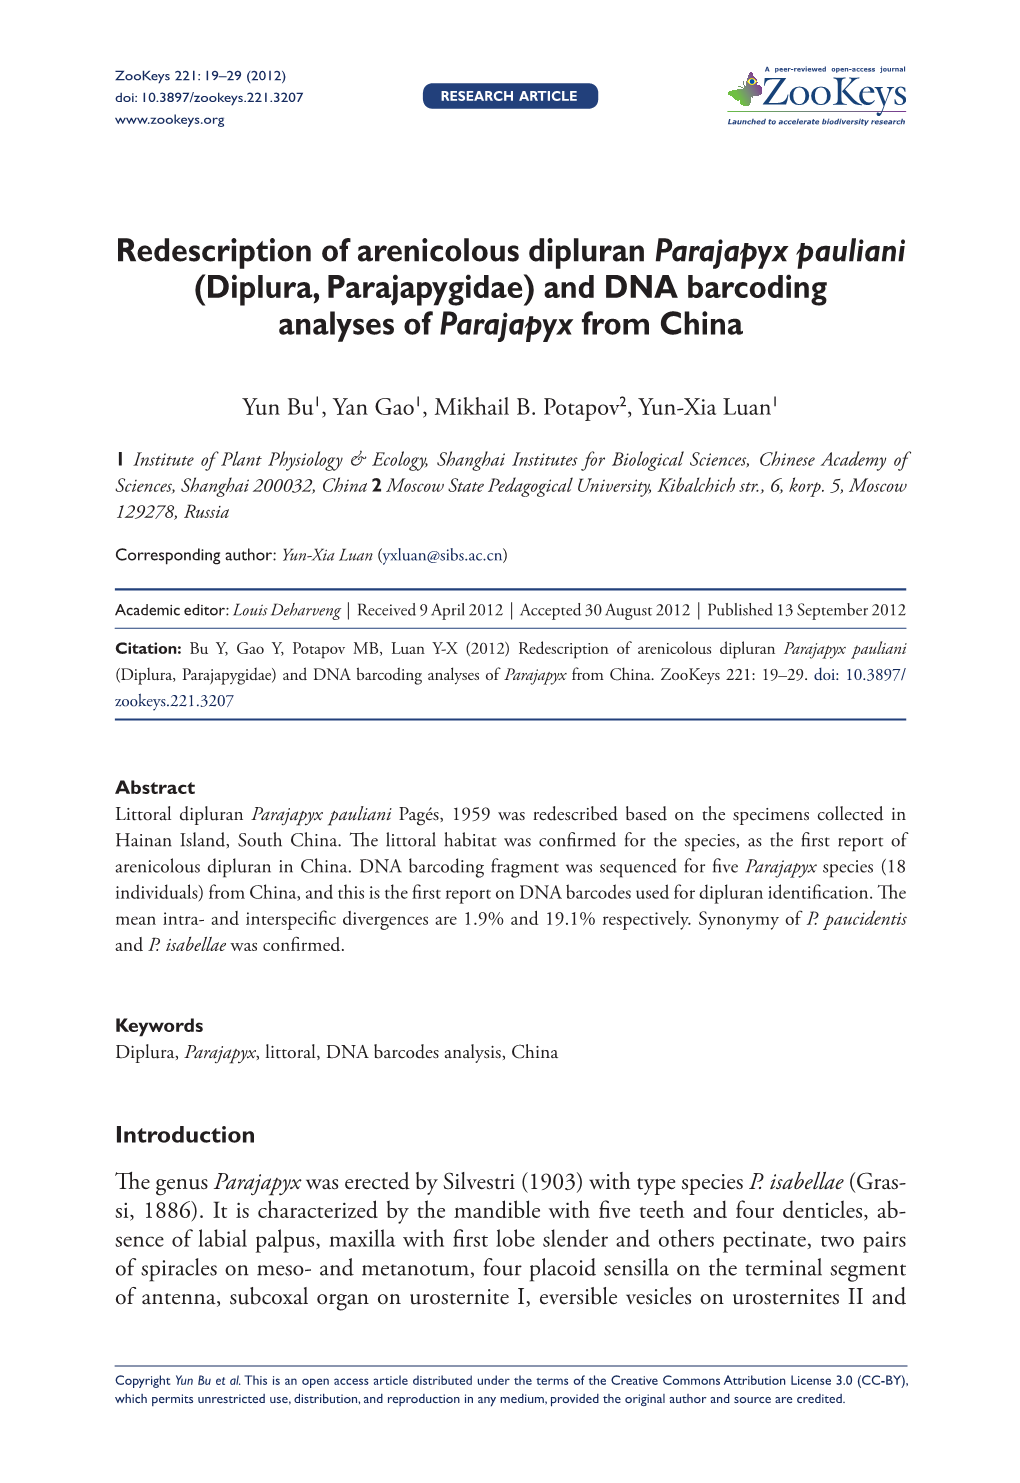 Redescription of Arenicolous Dipluran Parajapyx Pauliani (Diplura, Parajapygidae) and DNA Barcoding Analyses of Parajapyx from China